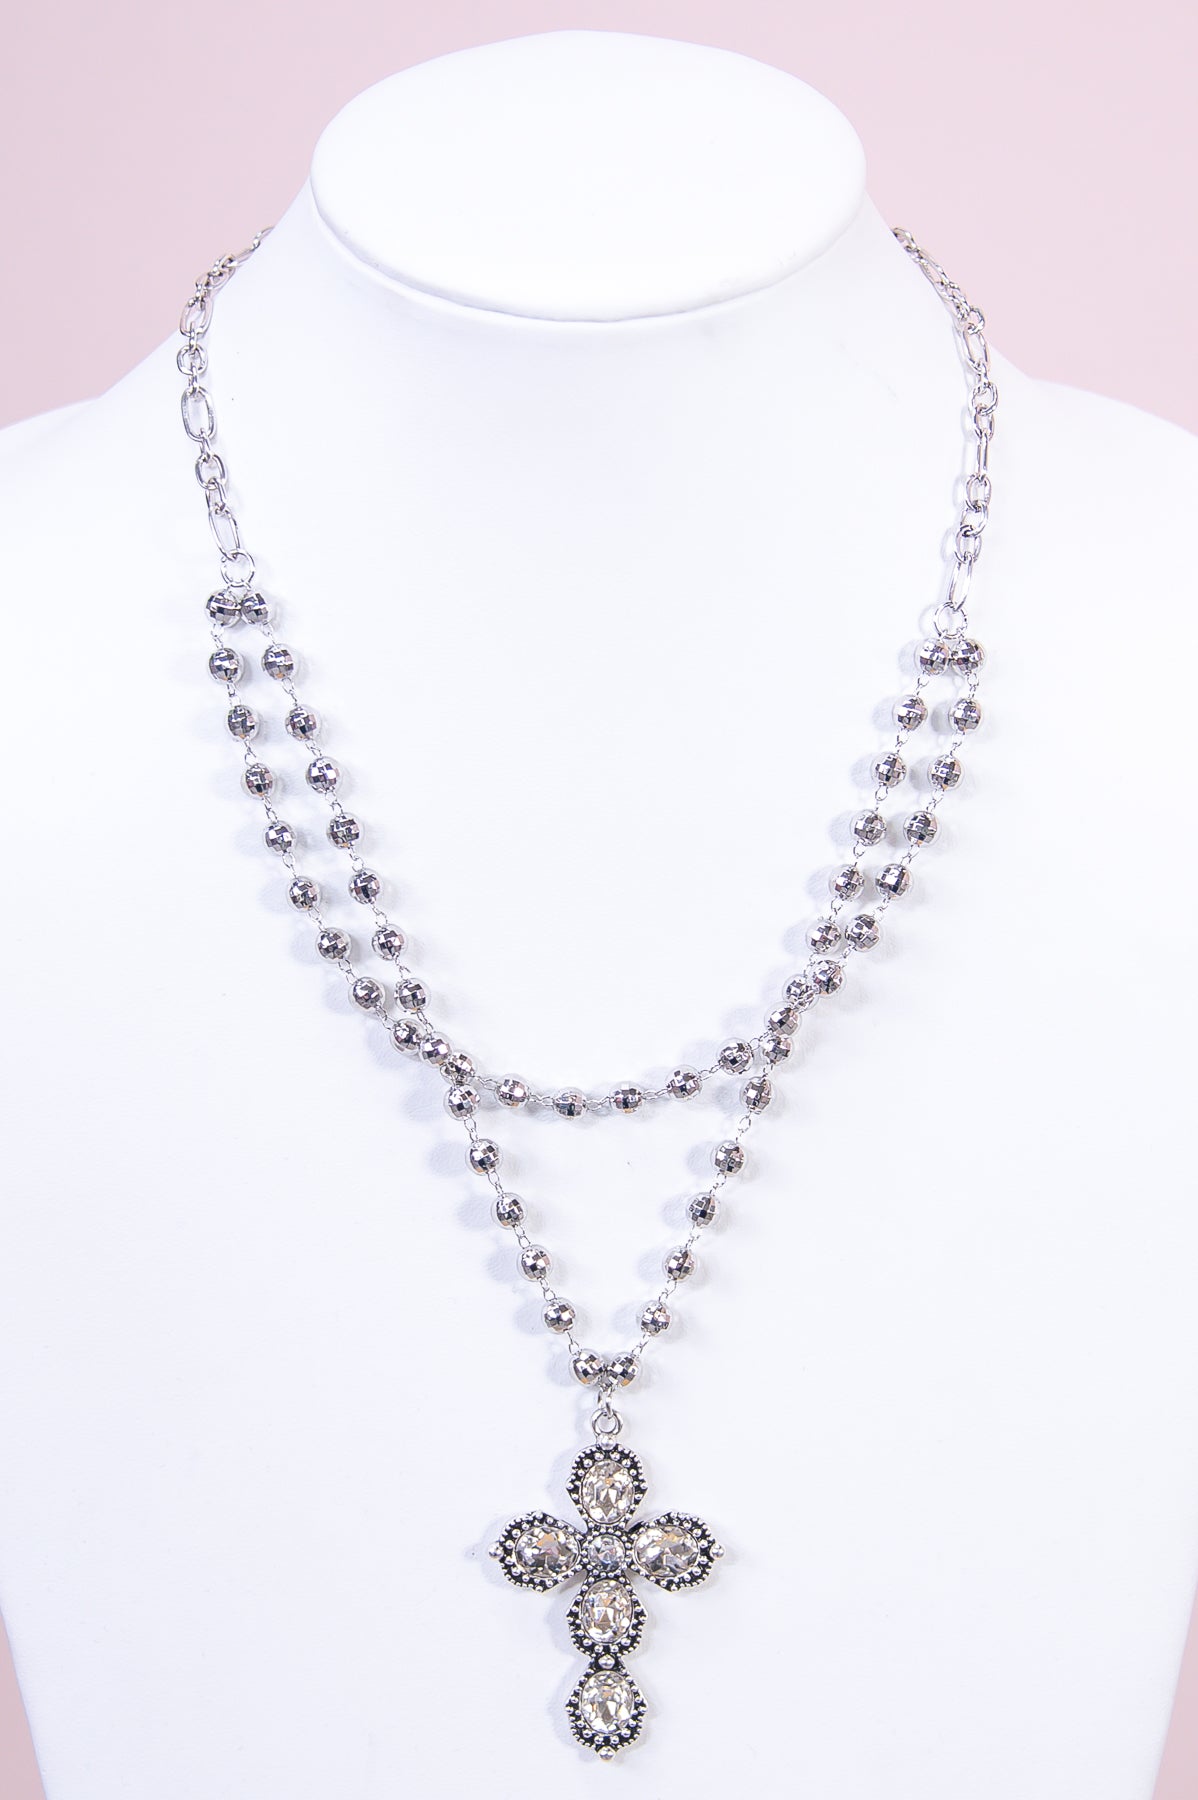 Silver/Clear Bling Cross Layered Necklace - NEK4328SI